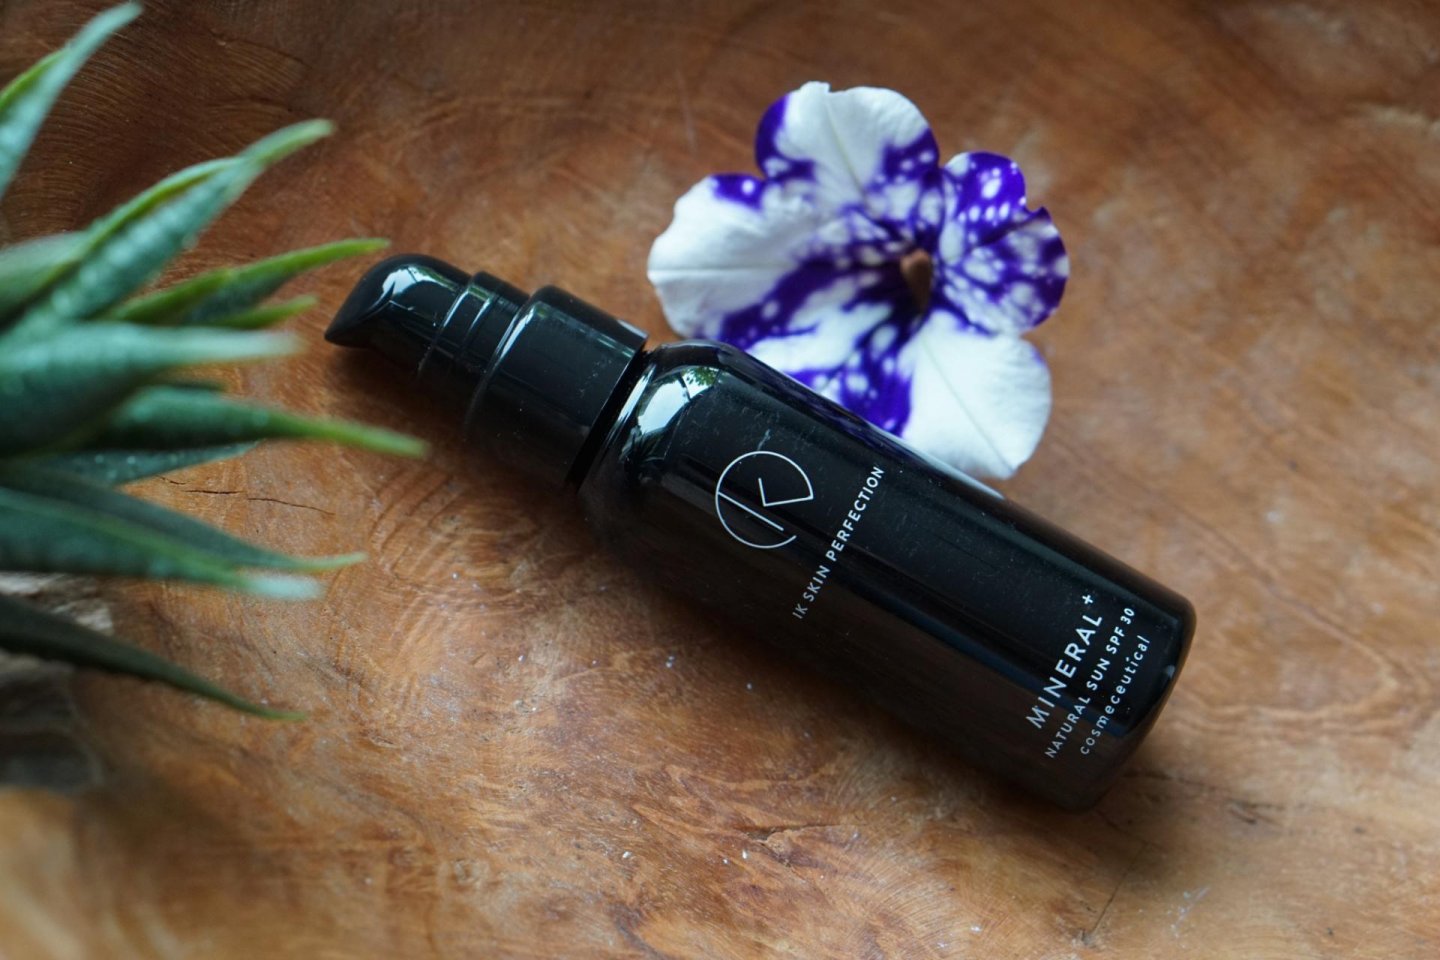 Ik Skin Perfection mineral spf 30 review